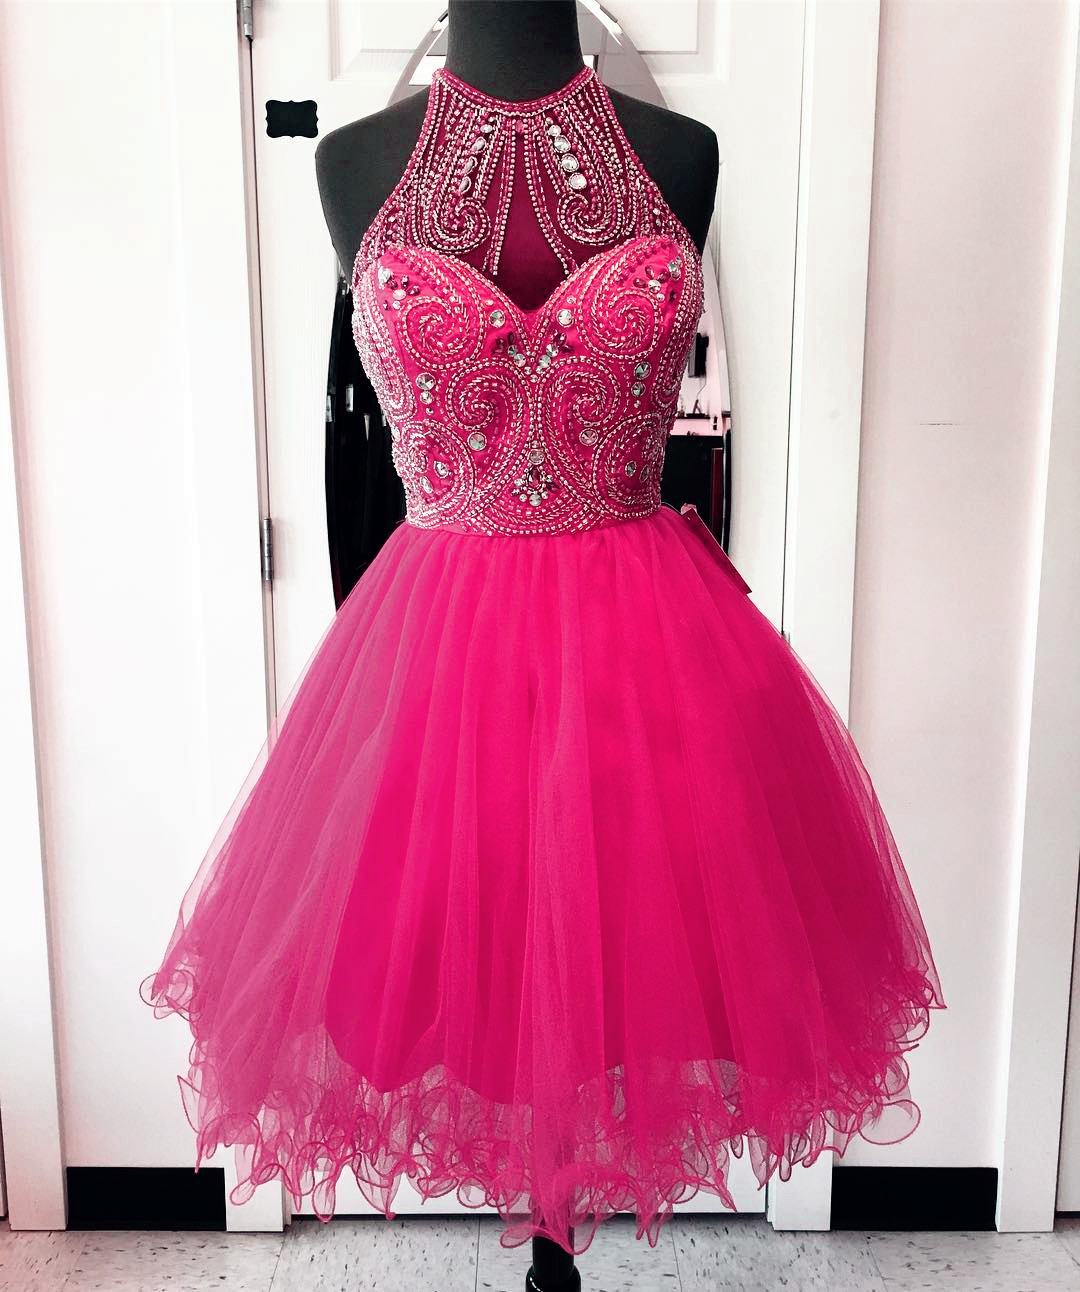 Prom Dresses,homecoming Dresses,high Neck Homecoming Dresses, Pink Prom Dresses,chic Party Dress,women's Cocktail Dress